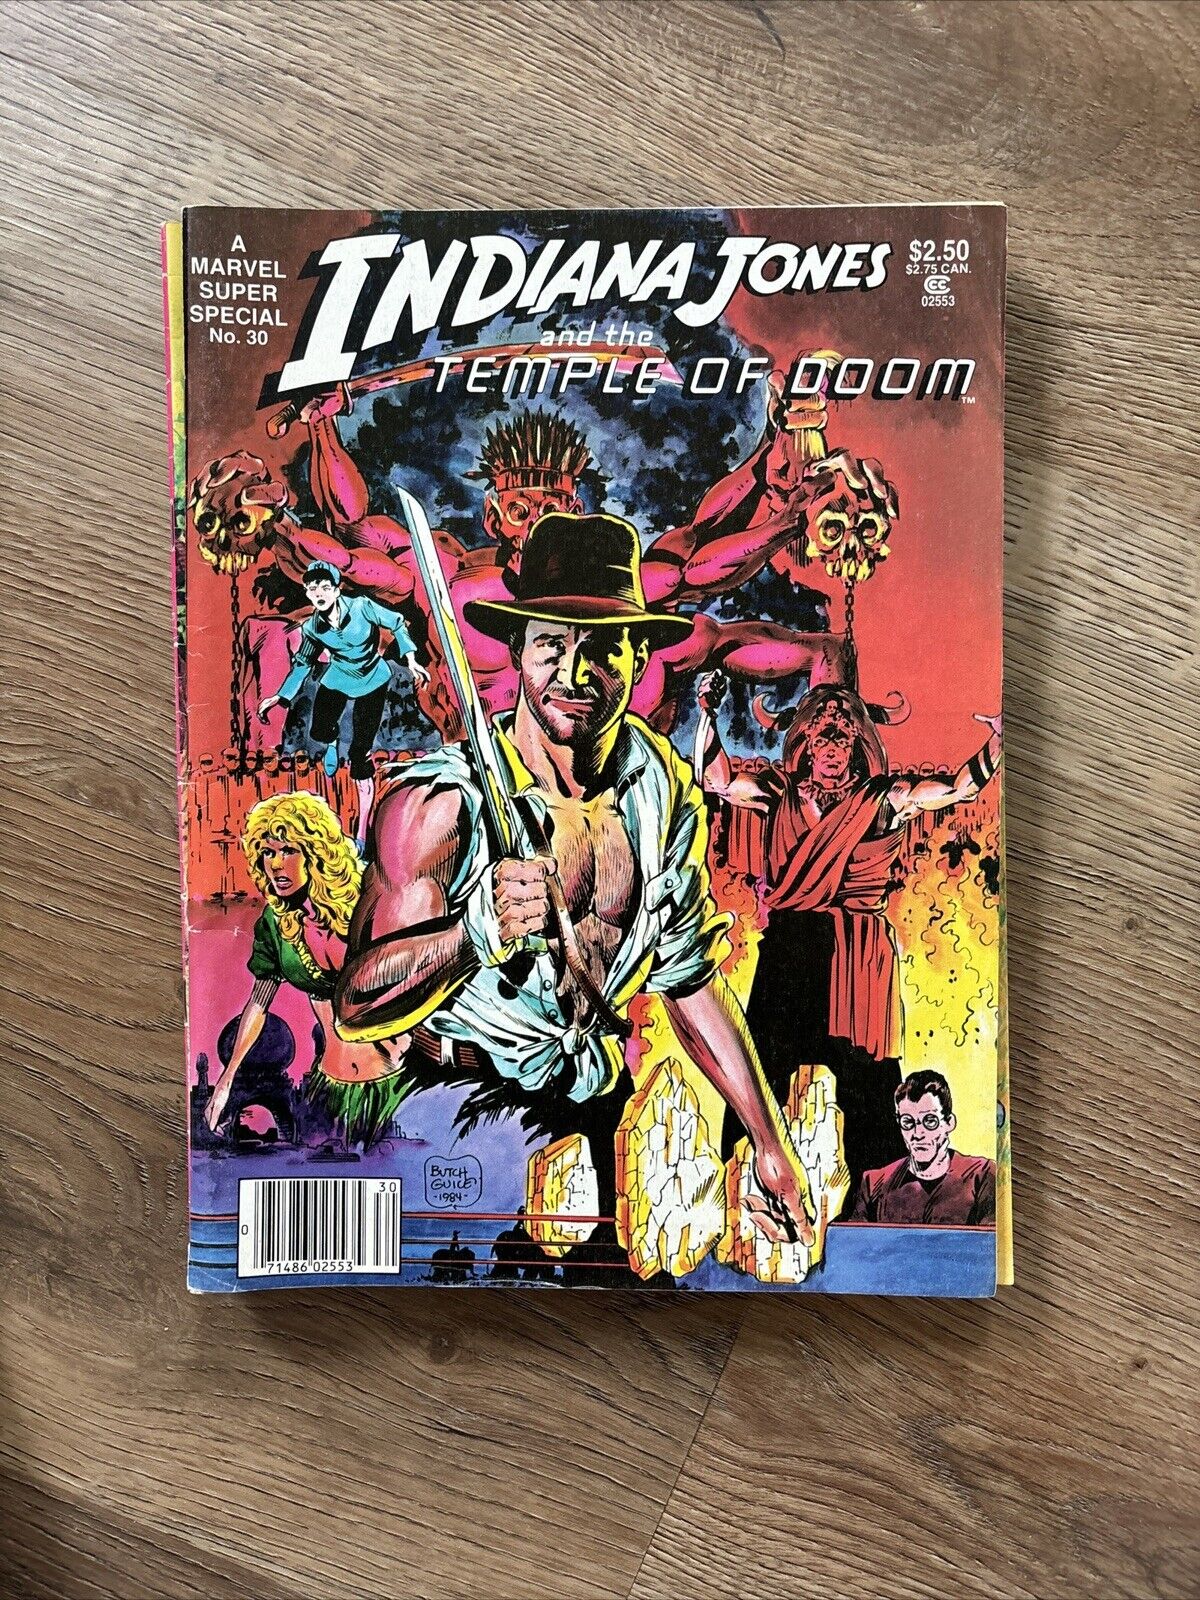 Marvel Super Special #30 Indiana Jones And the Temple Of Doom